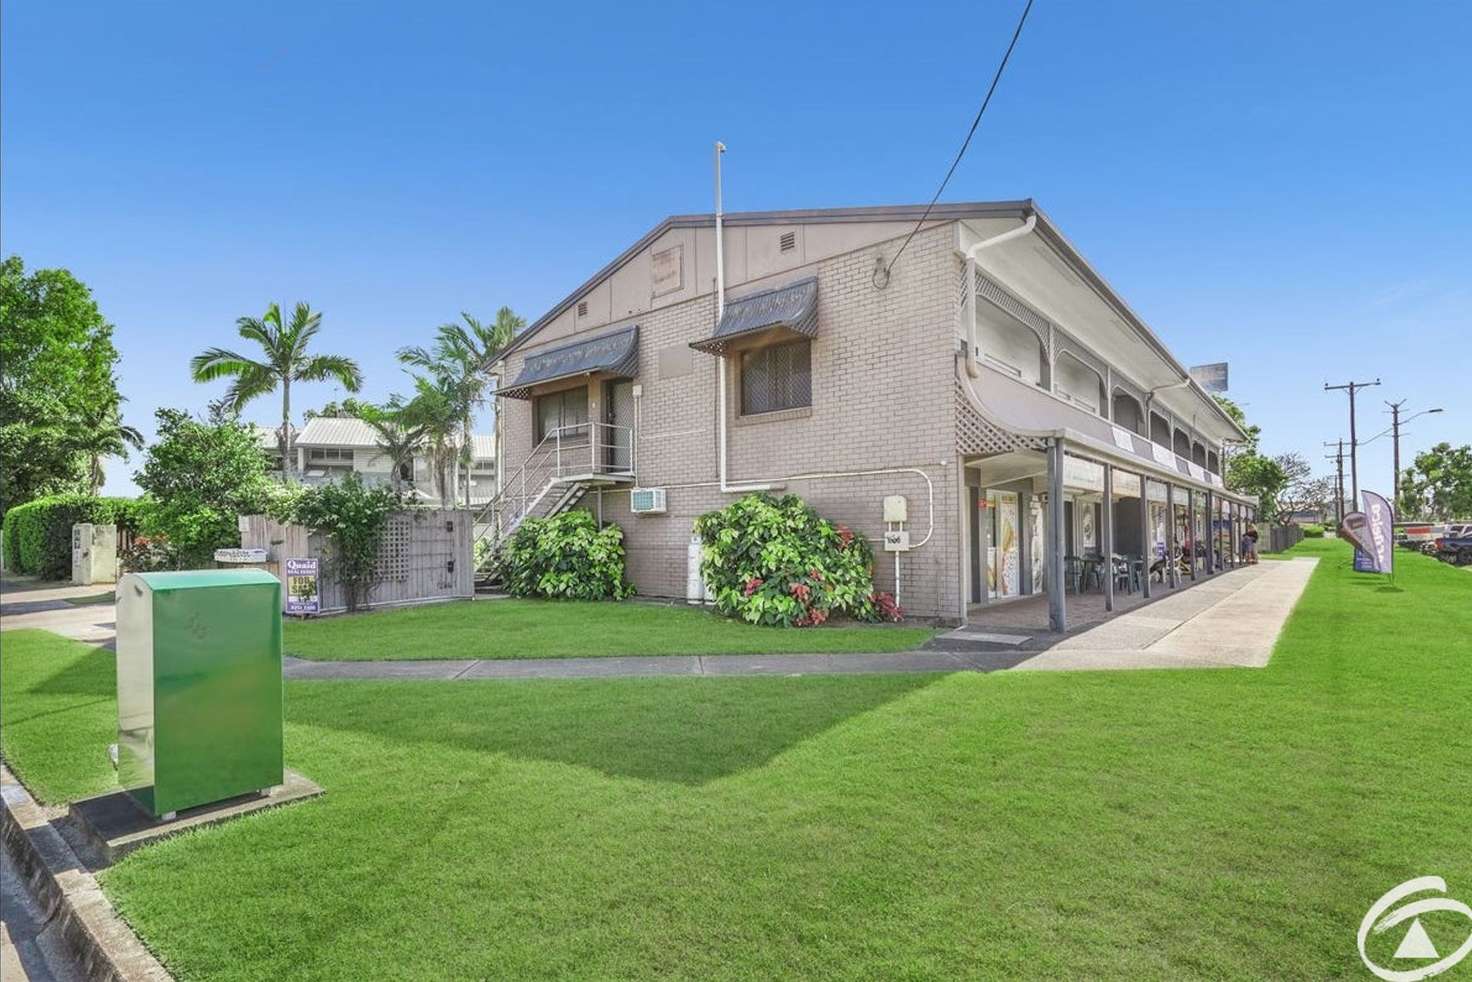 Main view of Homely unit listing, 6/2 Kidston street, Bungalow QLD 4870